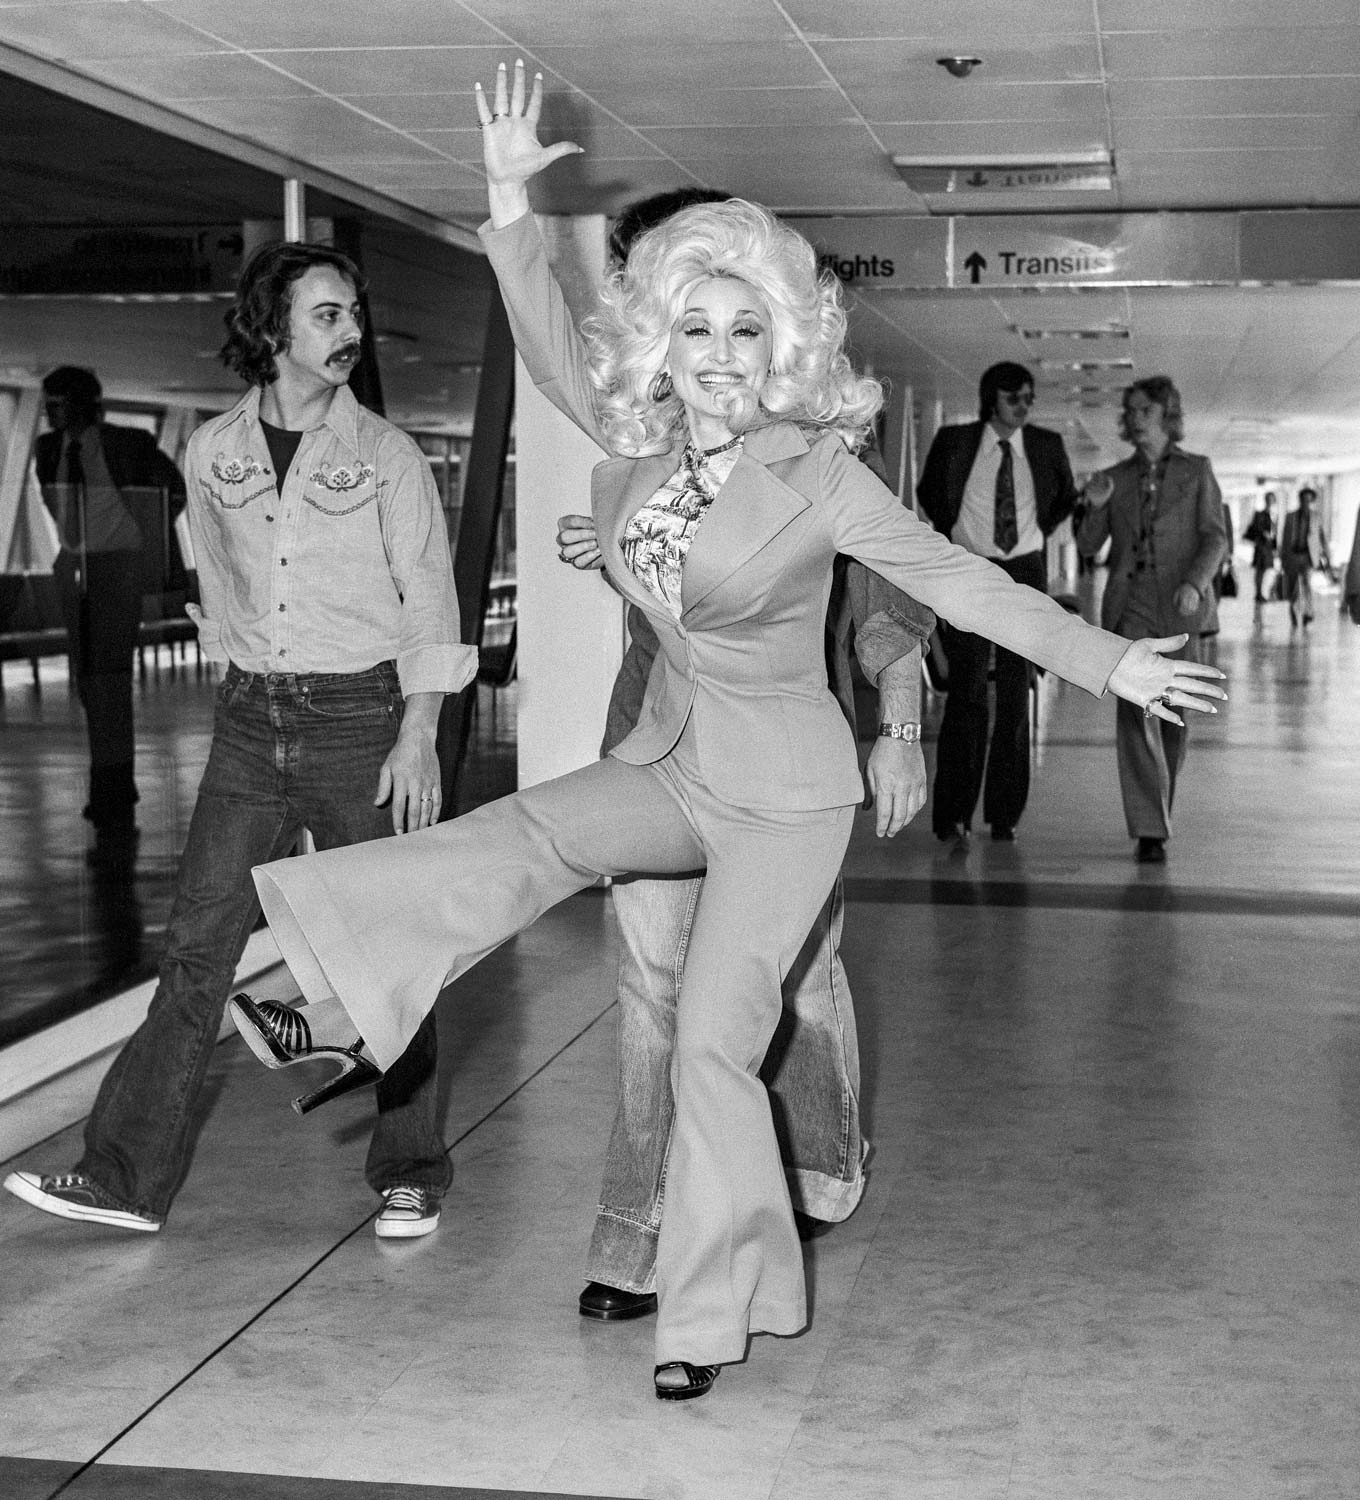 Dolly Parton leaving London's Heathrow Airport after performing at Wembley Stadium, 1976